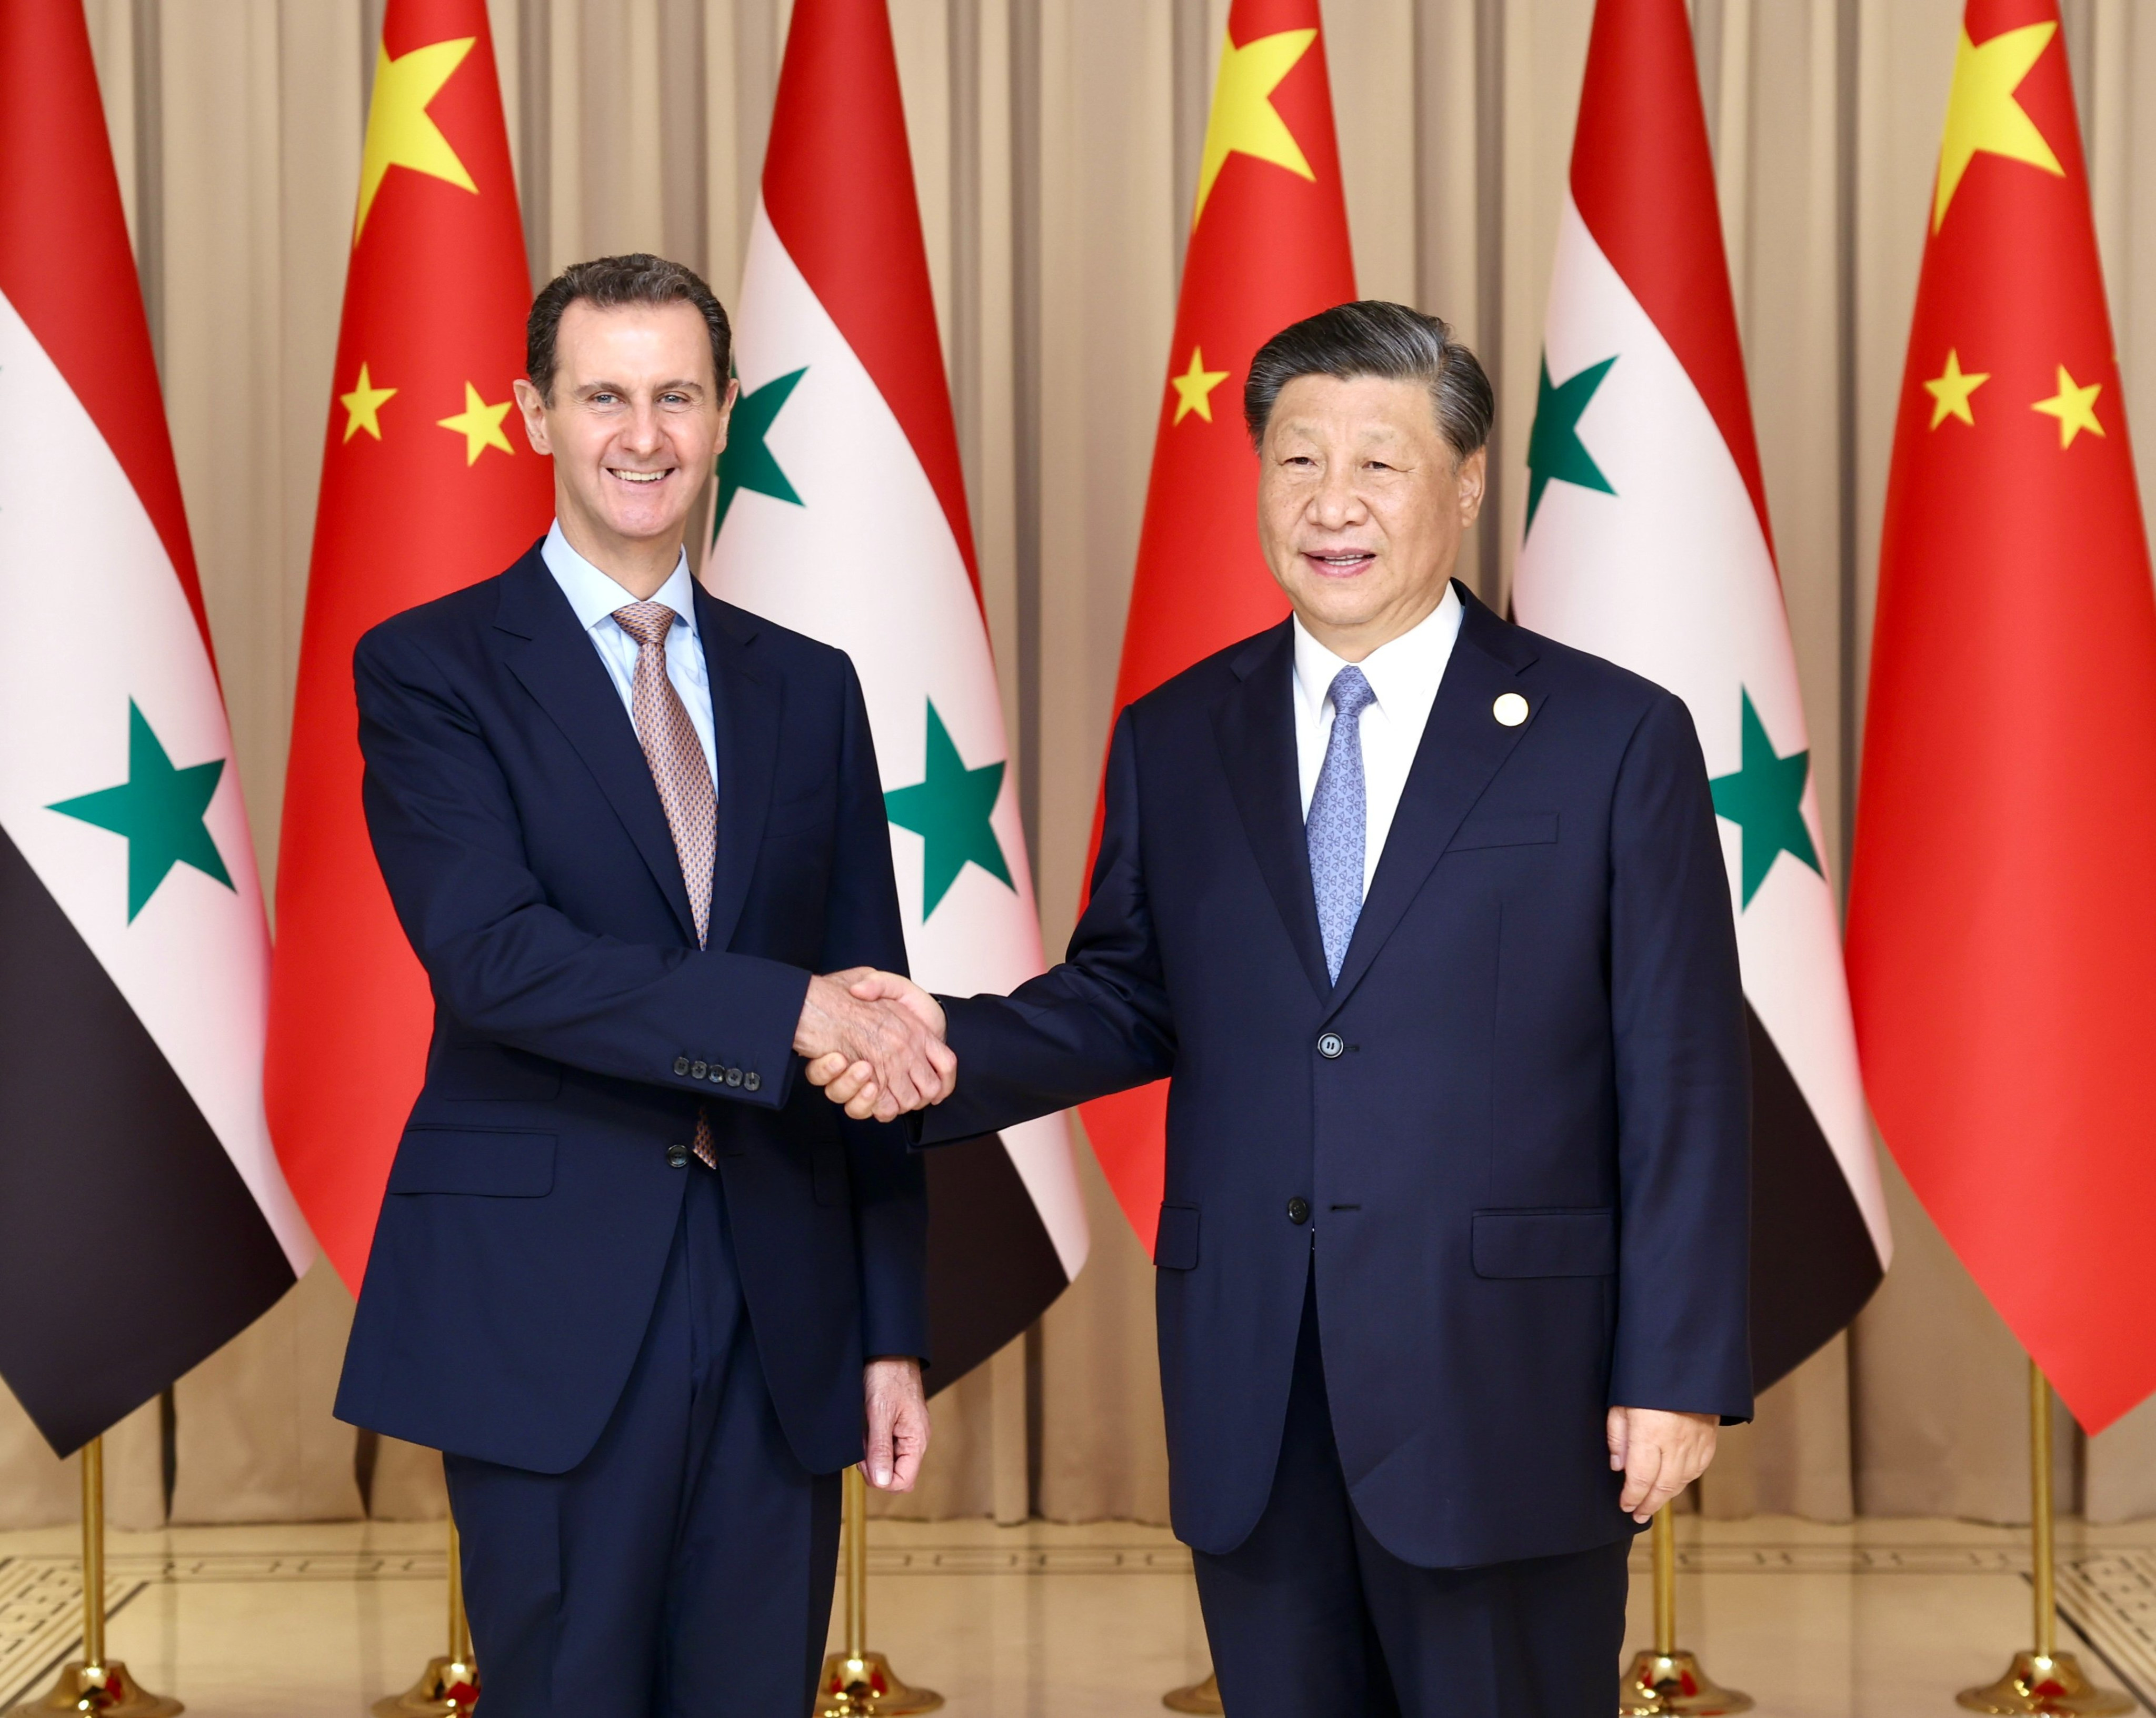 China is the third non-Arab country to be visited by Syrian President Bashar al-Assad (left), shown here shaking hands with Chinese President Xi Jinping in Hangzhou. Photo: Twitter / Hua Chunying